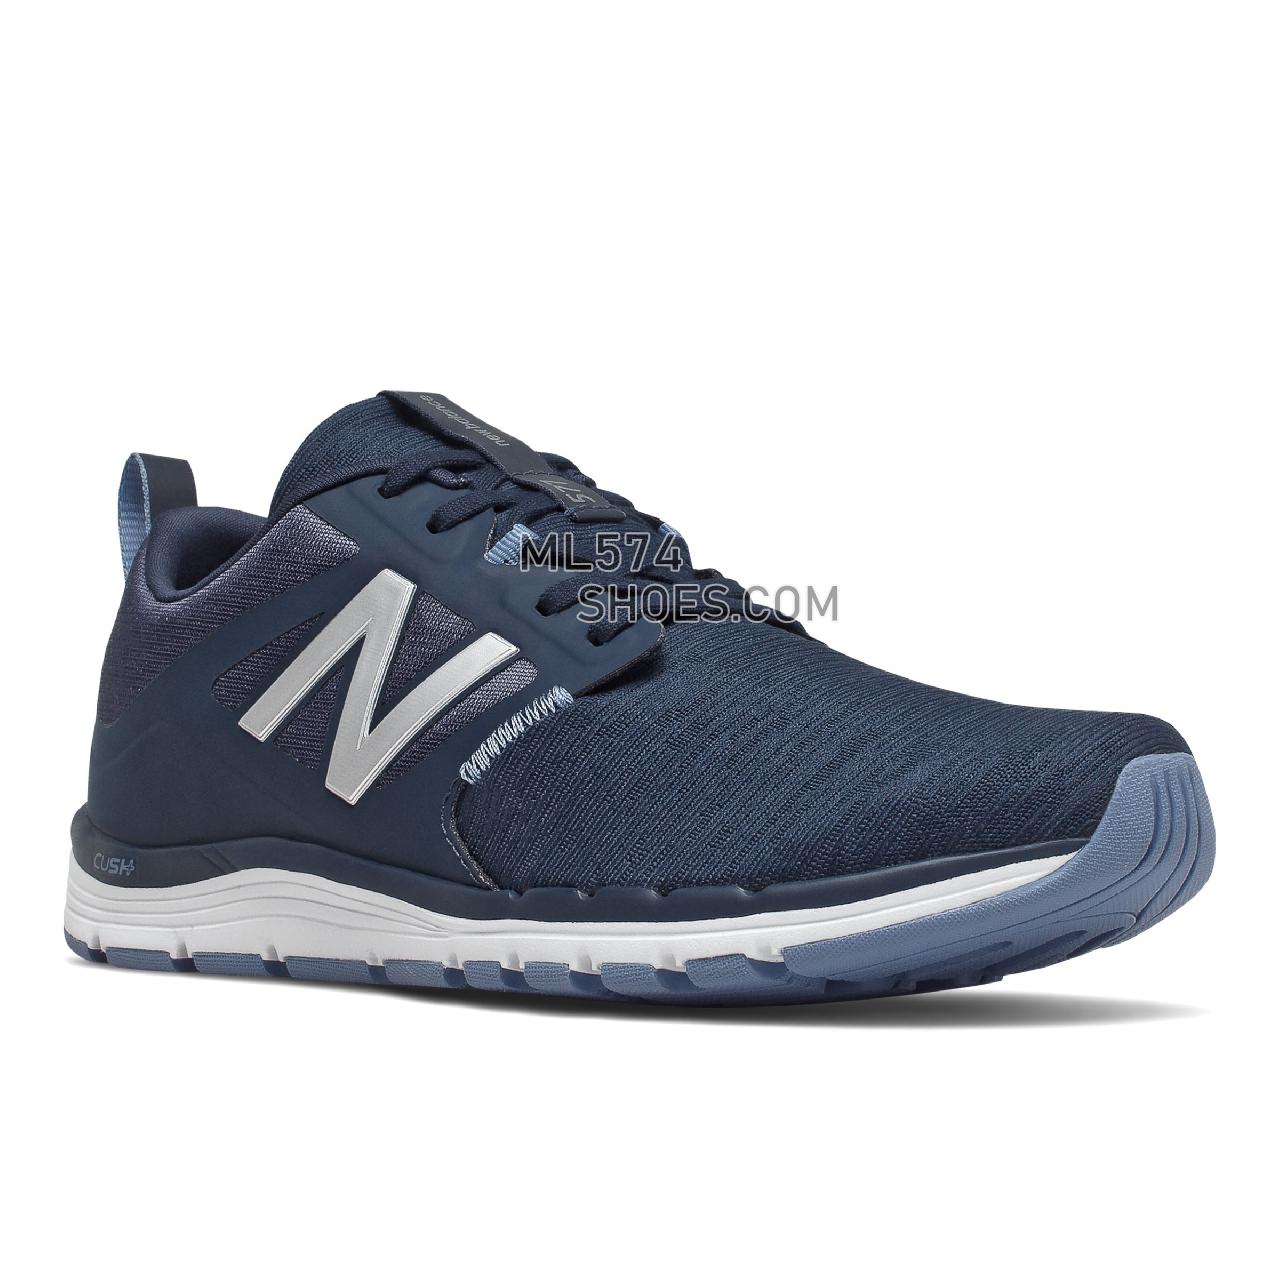 New Balance 577v5 - Women's Workout - Navy with Silver - WX577CN5